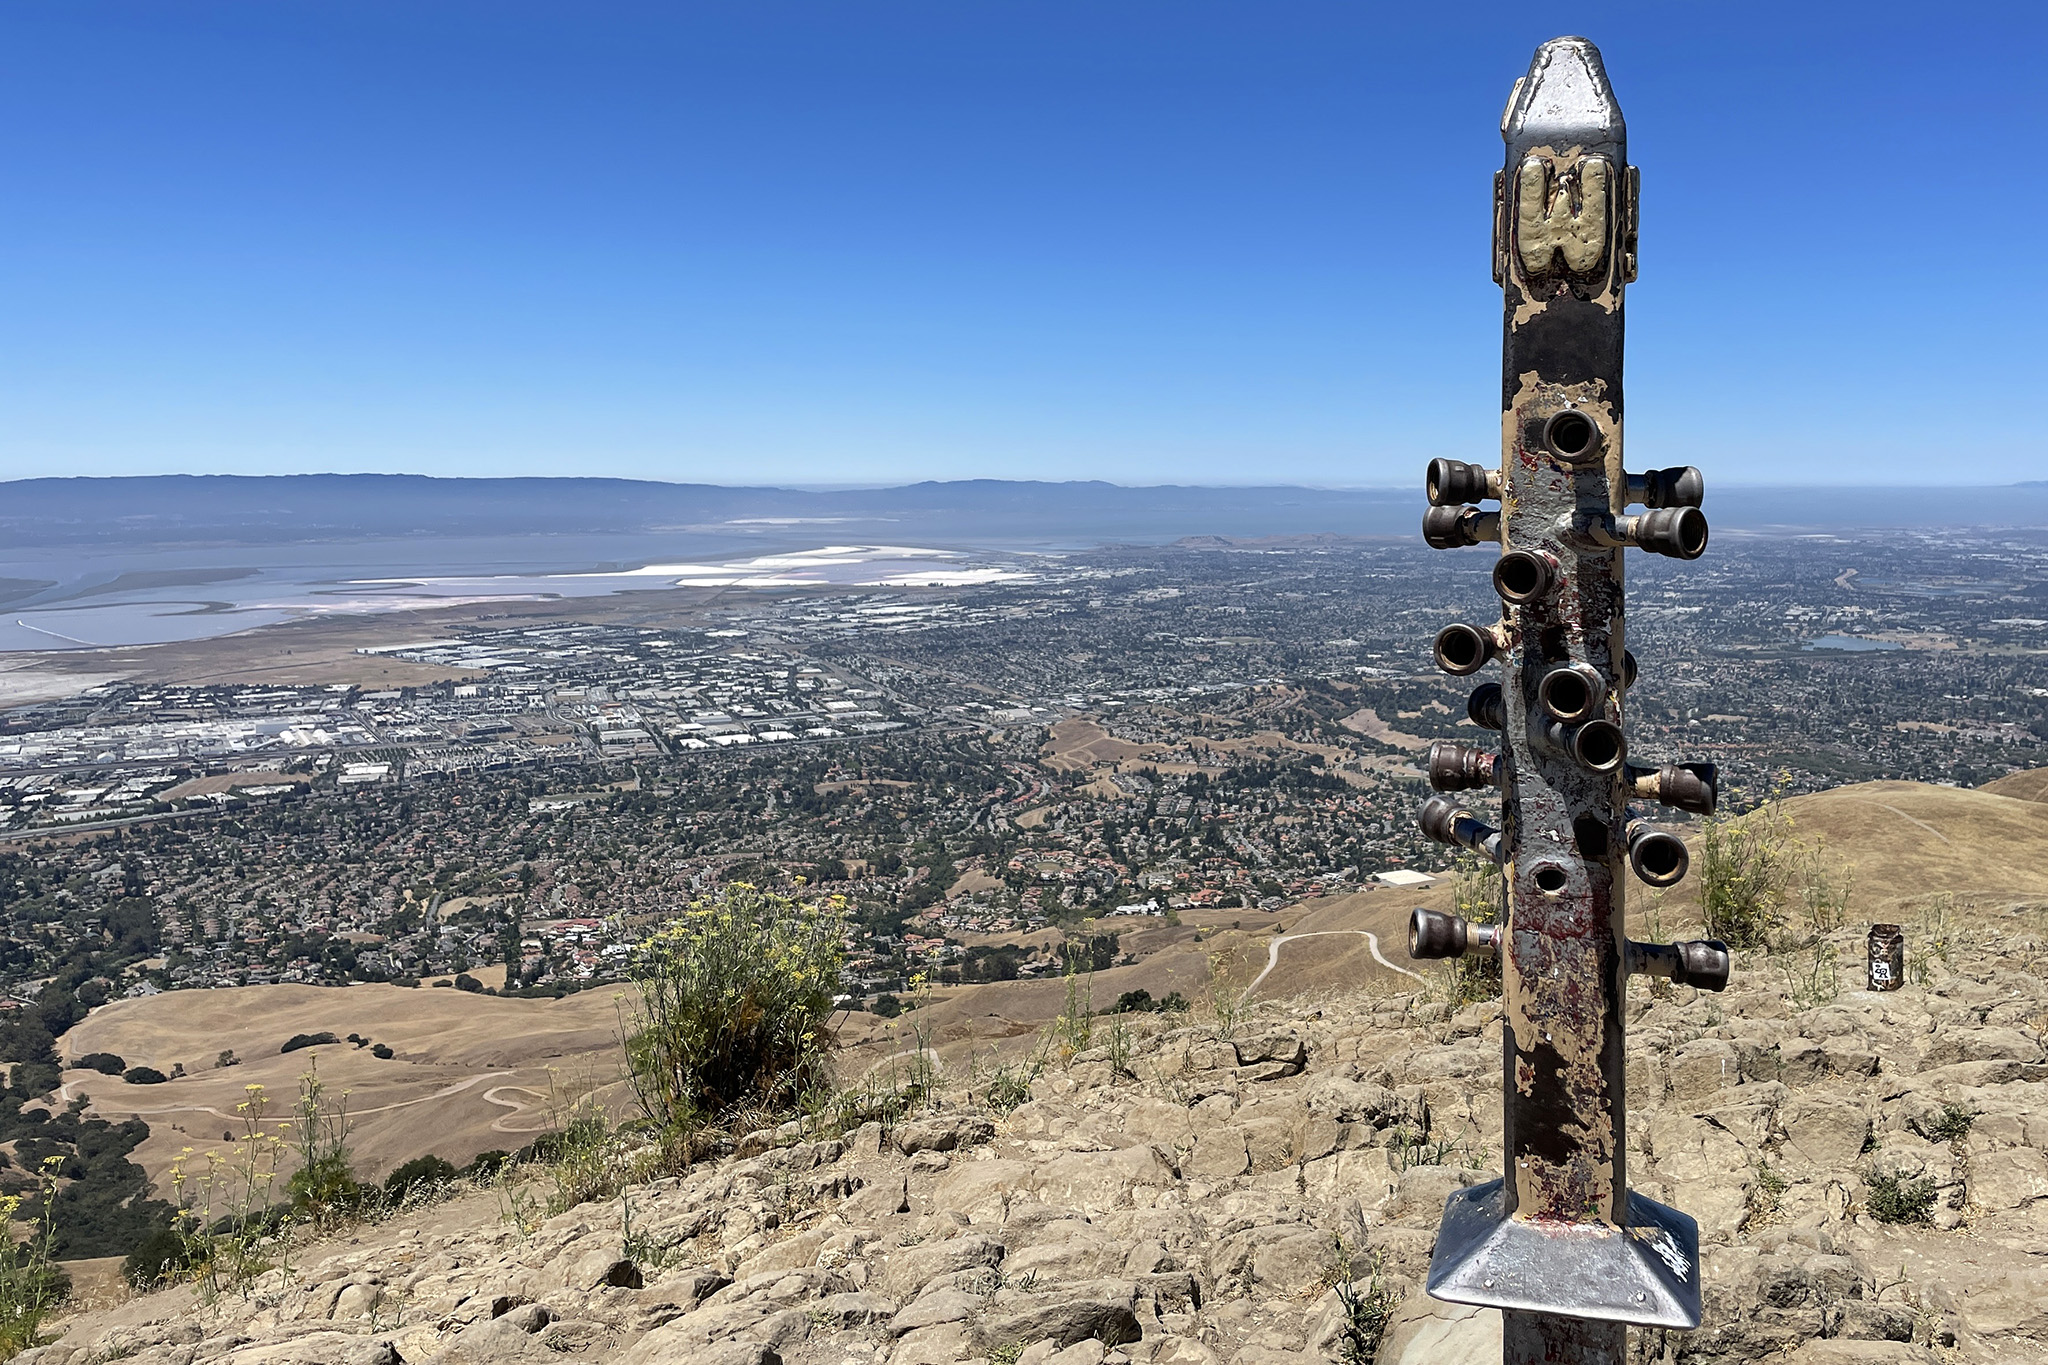 Mission Peak hike reveals views from Bay Area's past